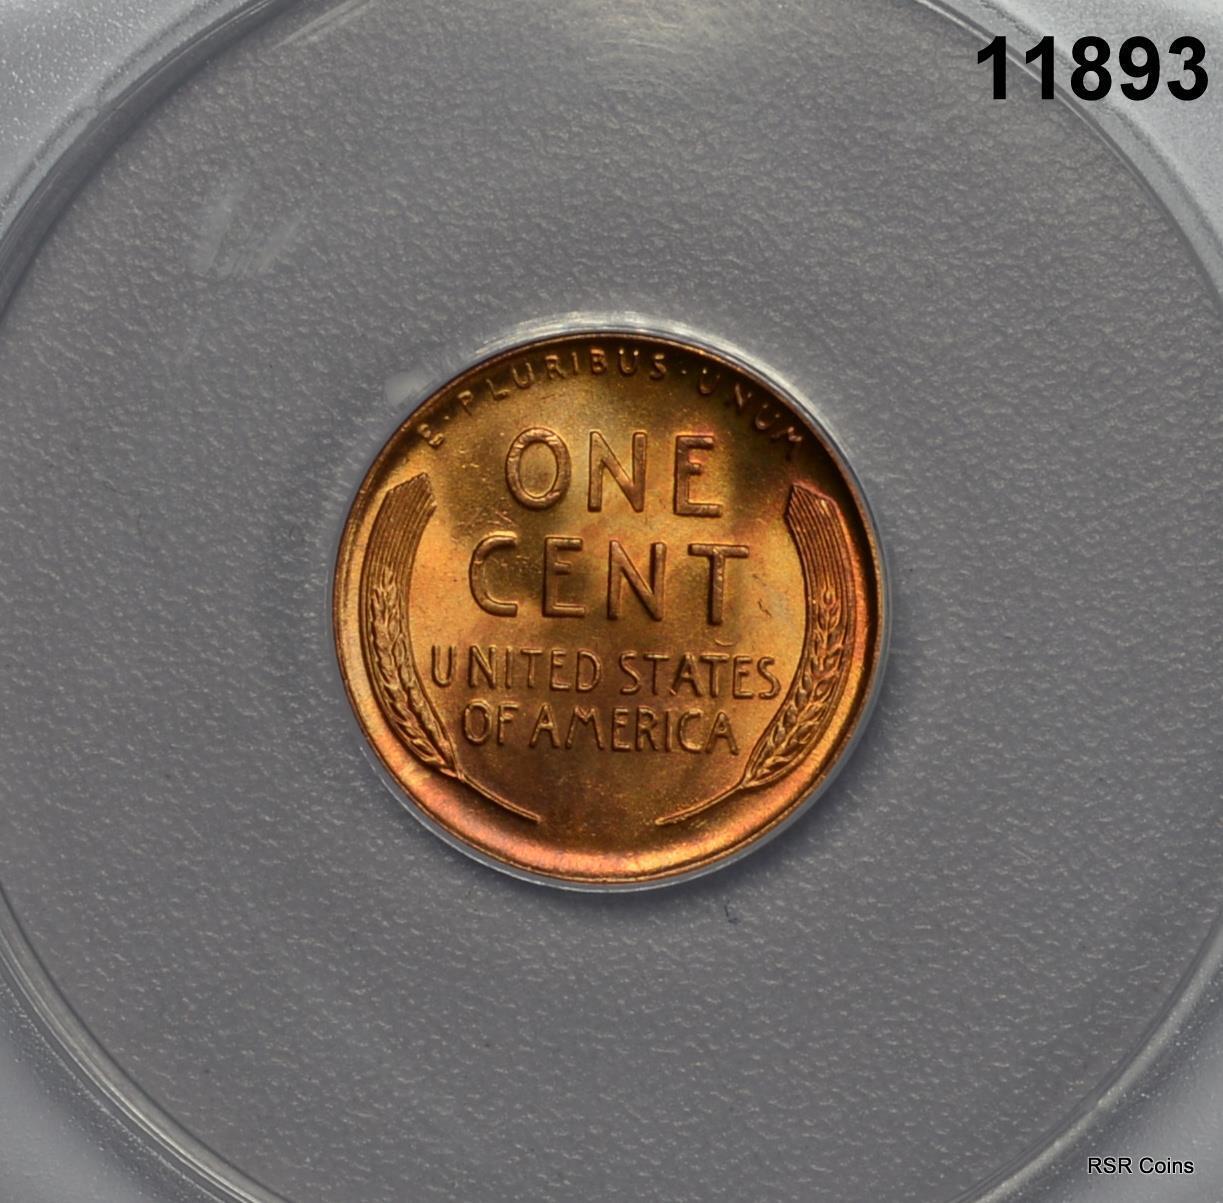 1947 LINCOLN CENT ANACS CERTIFIED MS66 RD FIRE RED #11893